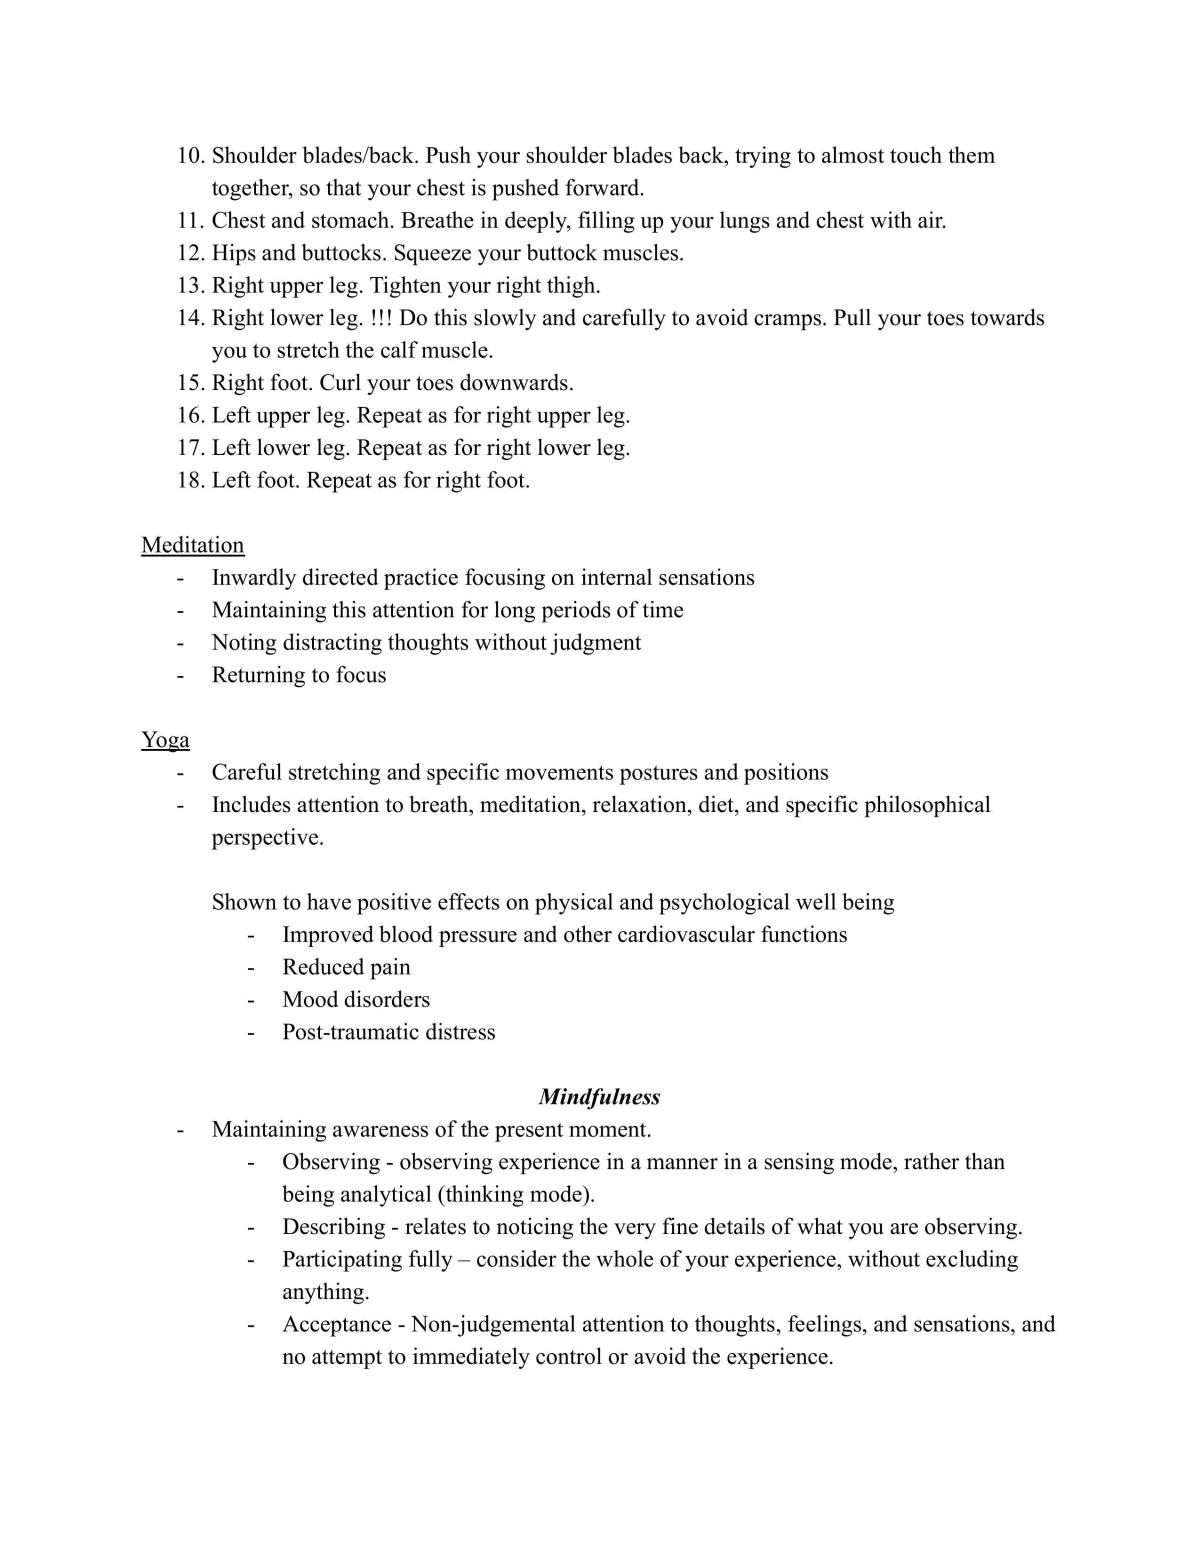 COU300 Counselling for Crisis, Trauma and Loss Complete Course Notes - Page 52